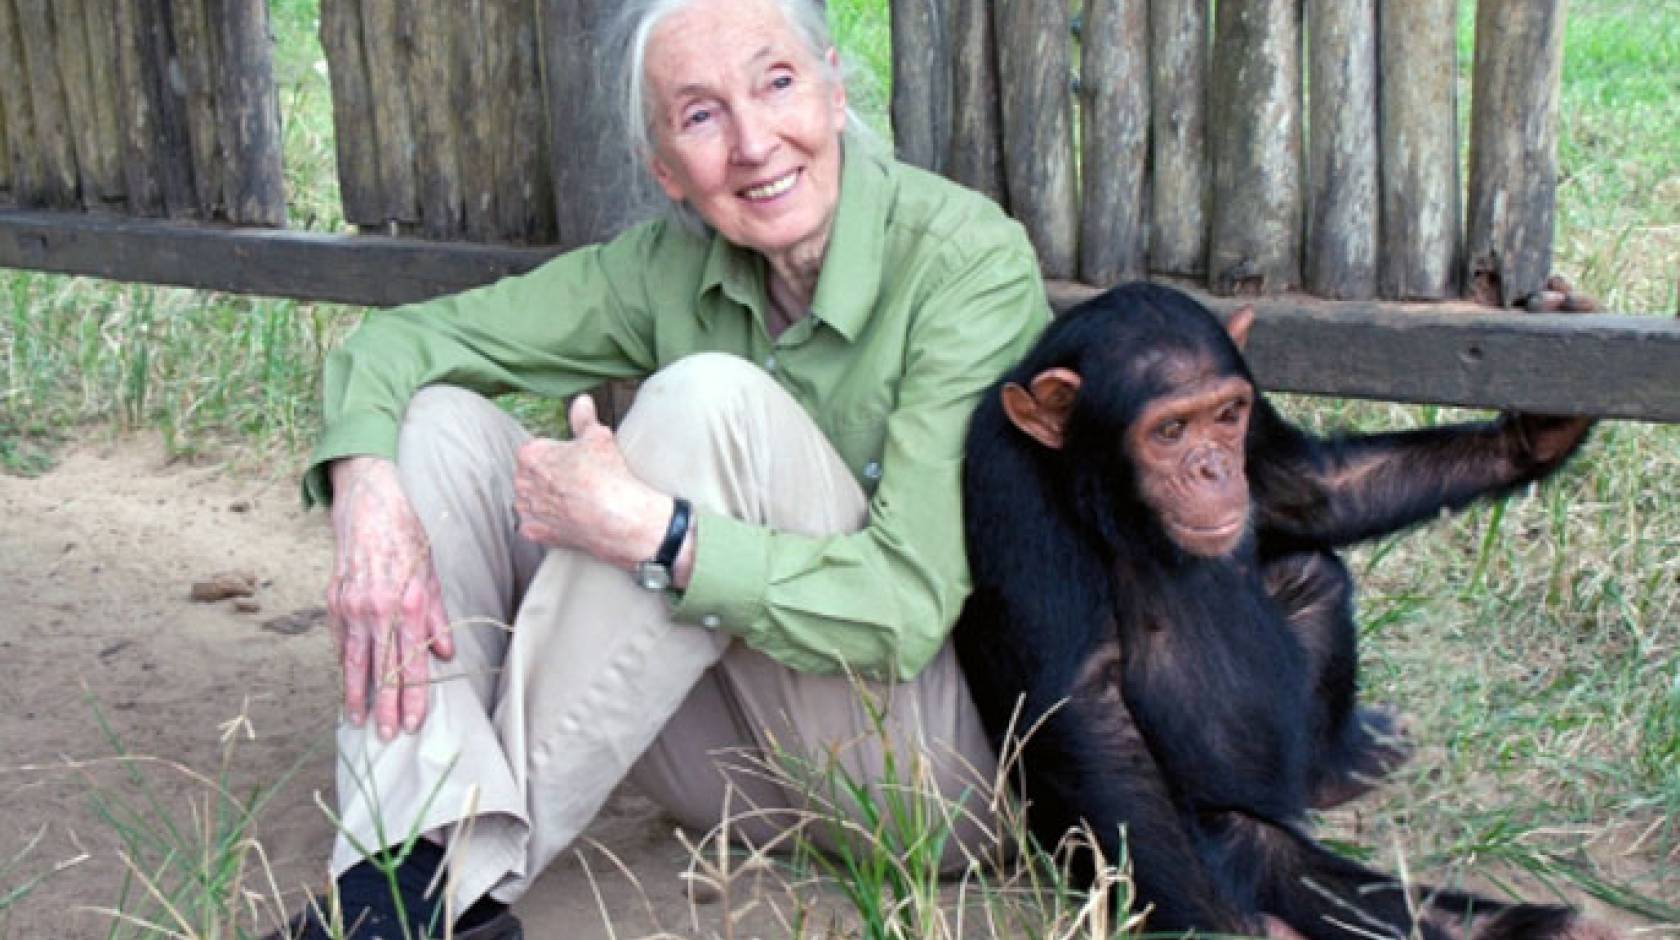 Jane Goodall sitting with a chimp